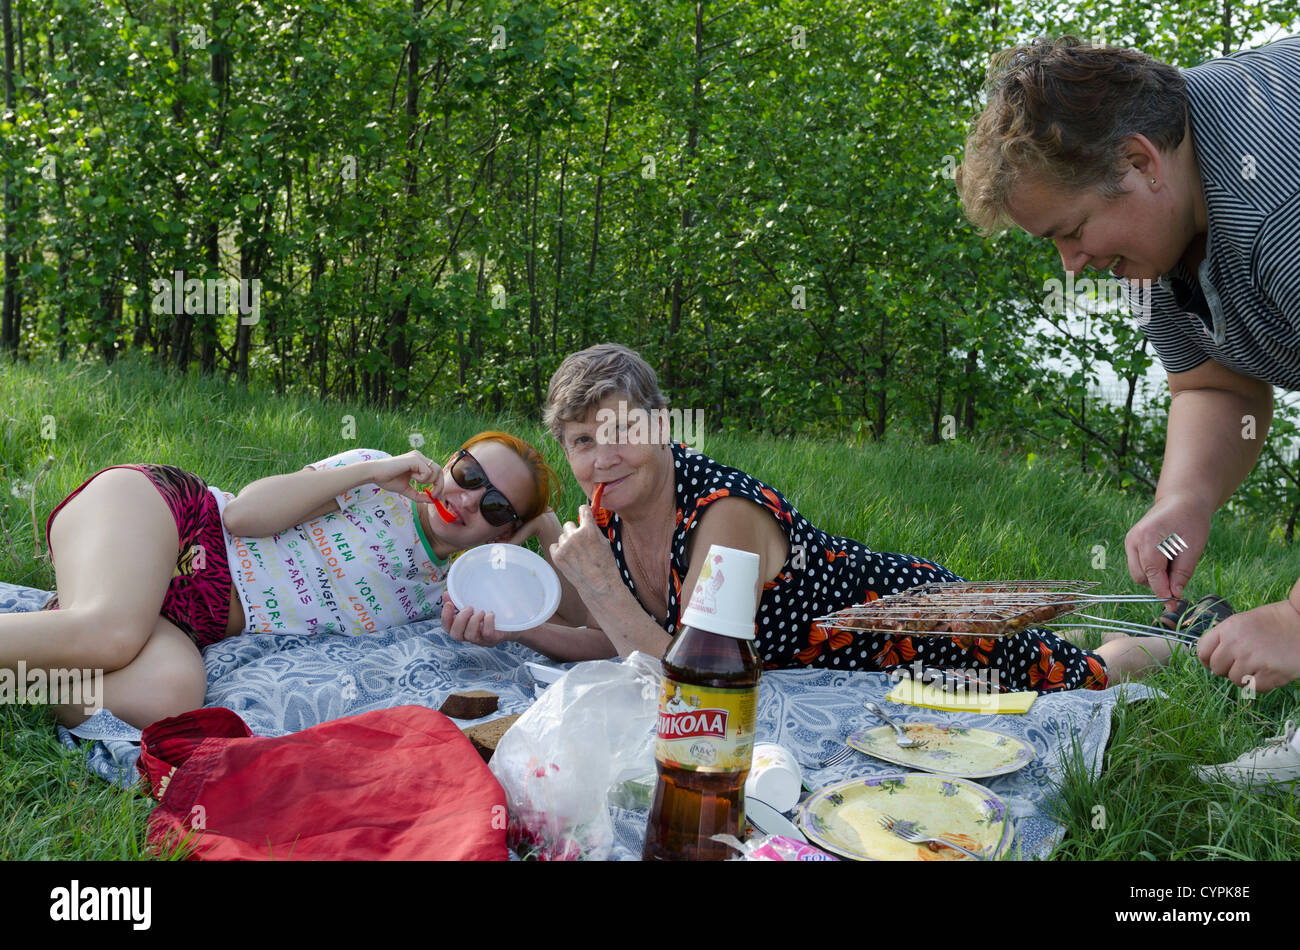 [Small Group Of People] Kasimov barbecue nature Stock Photo